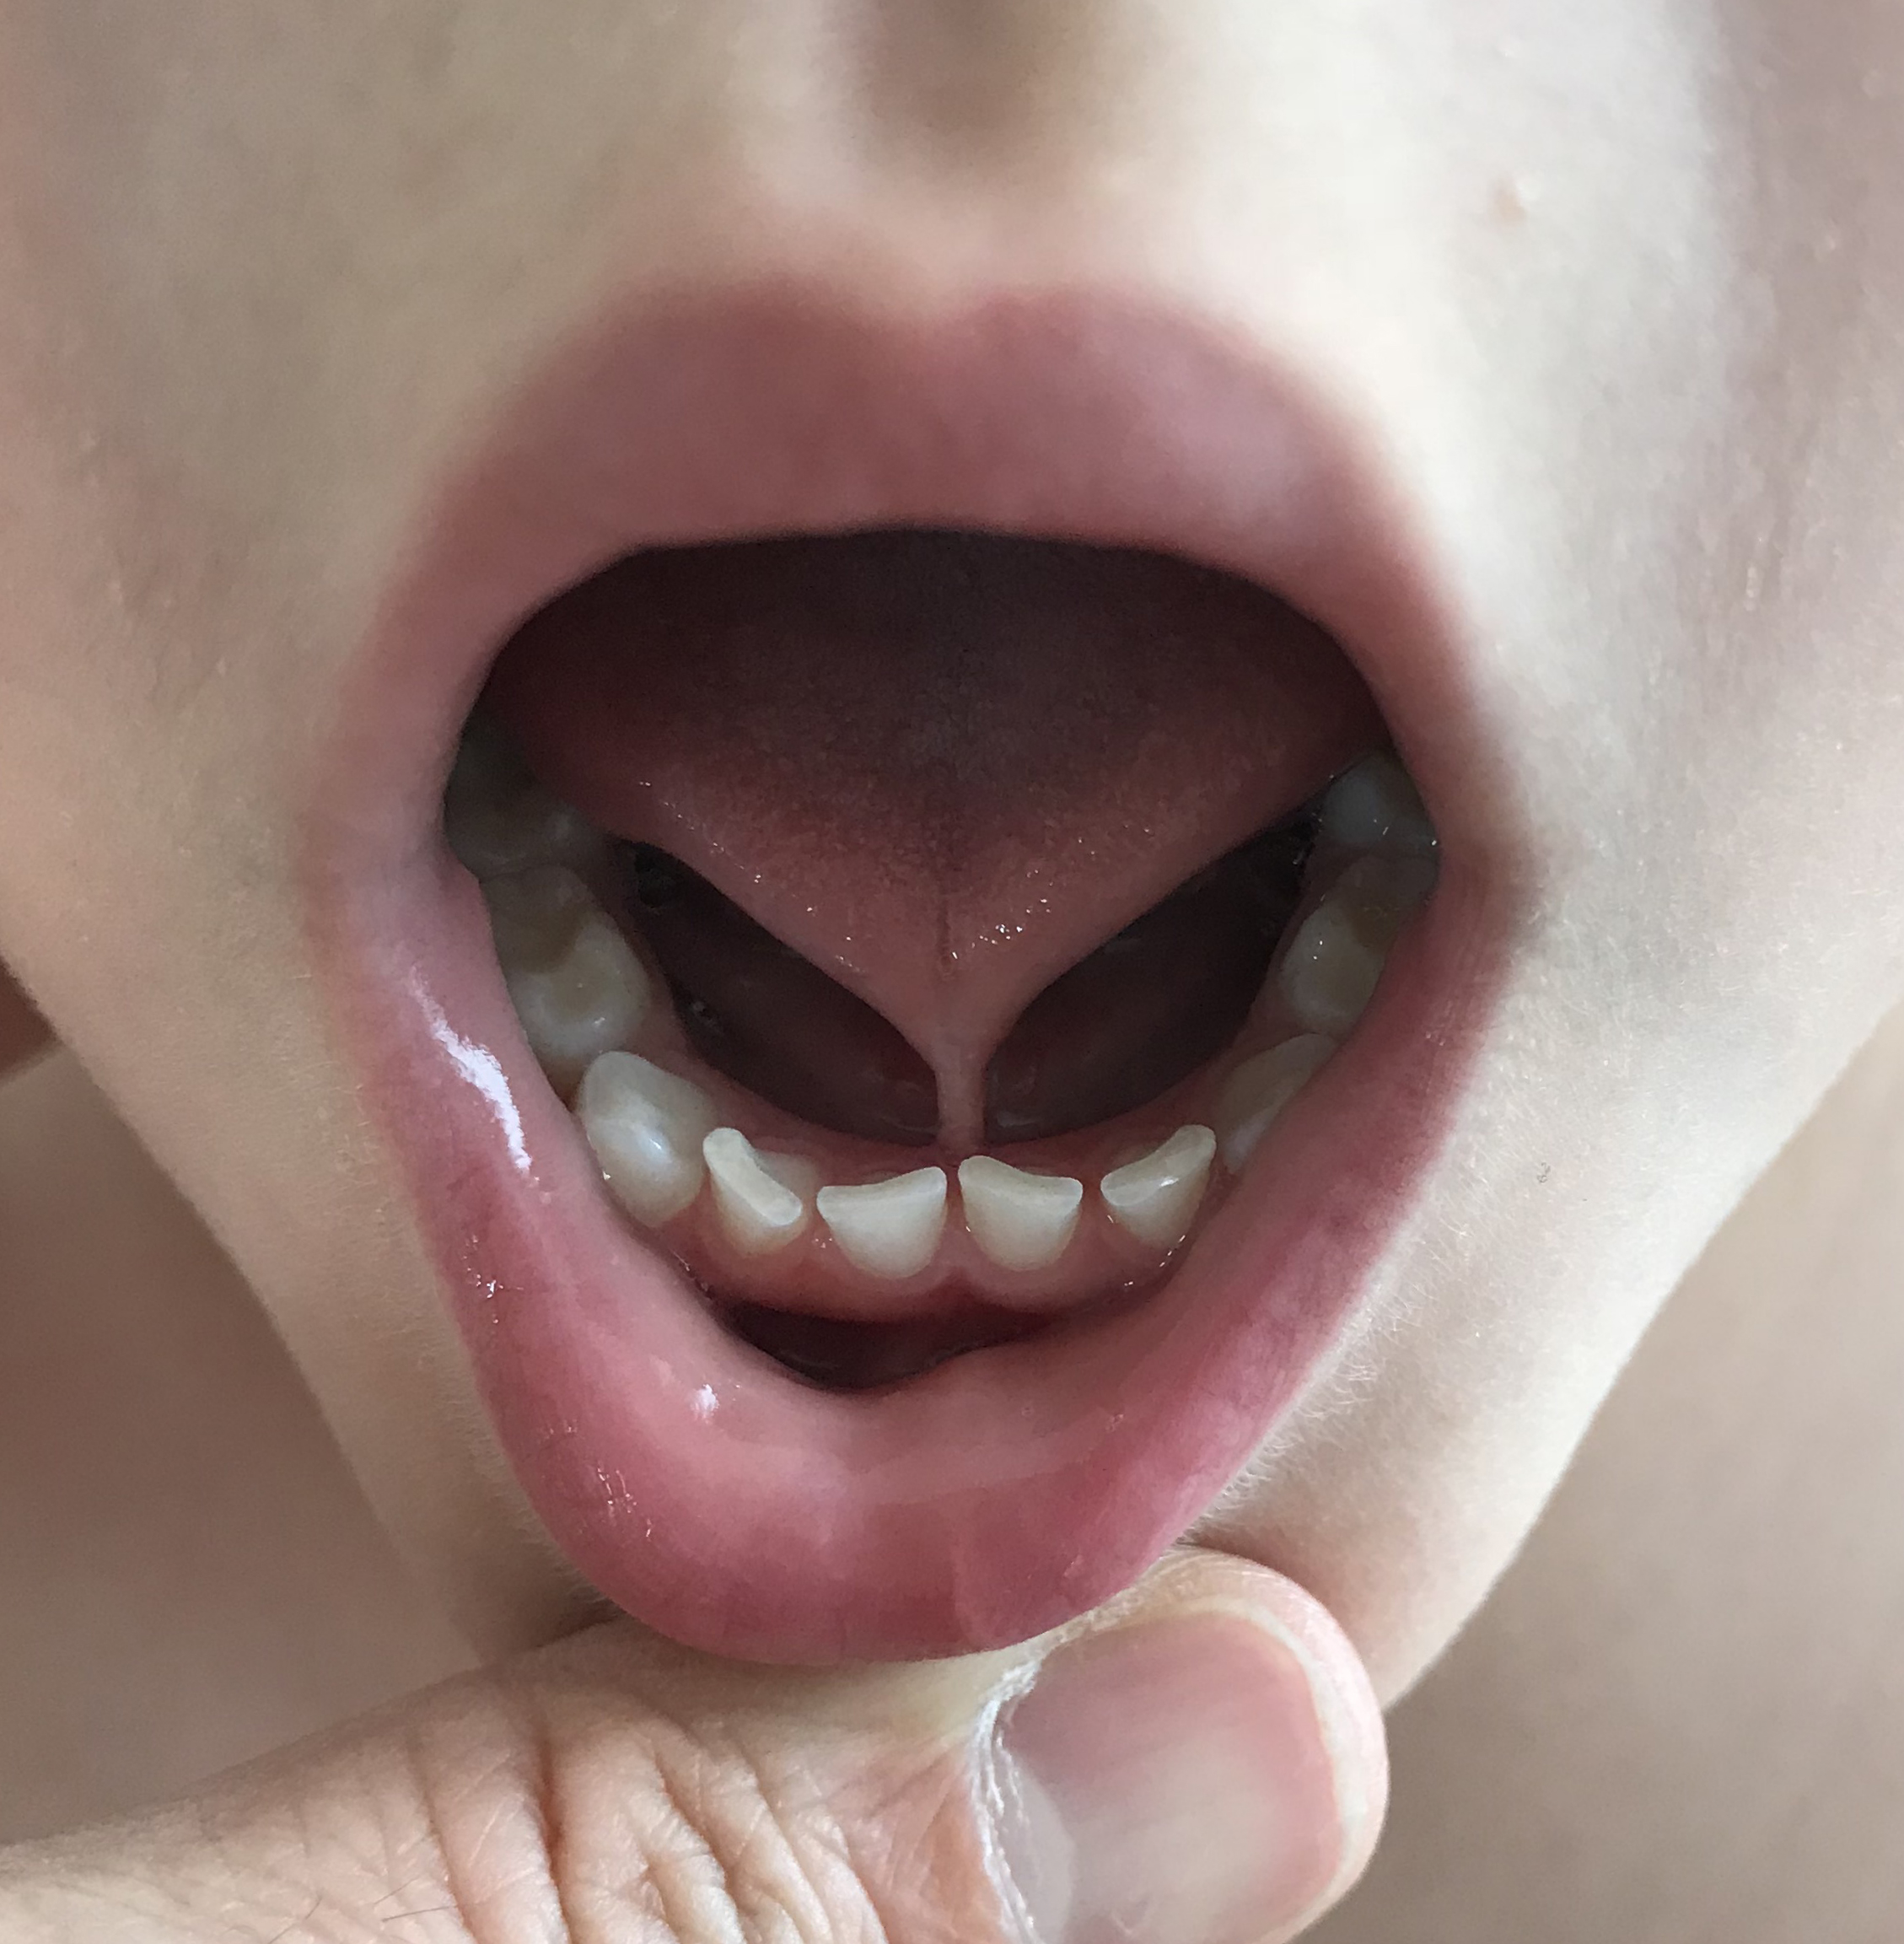 Ankyloglossia. Note the lingual frenulum attachment at the tip of the tongue.